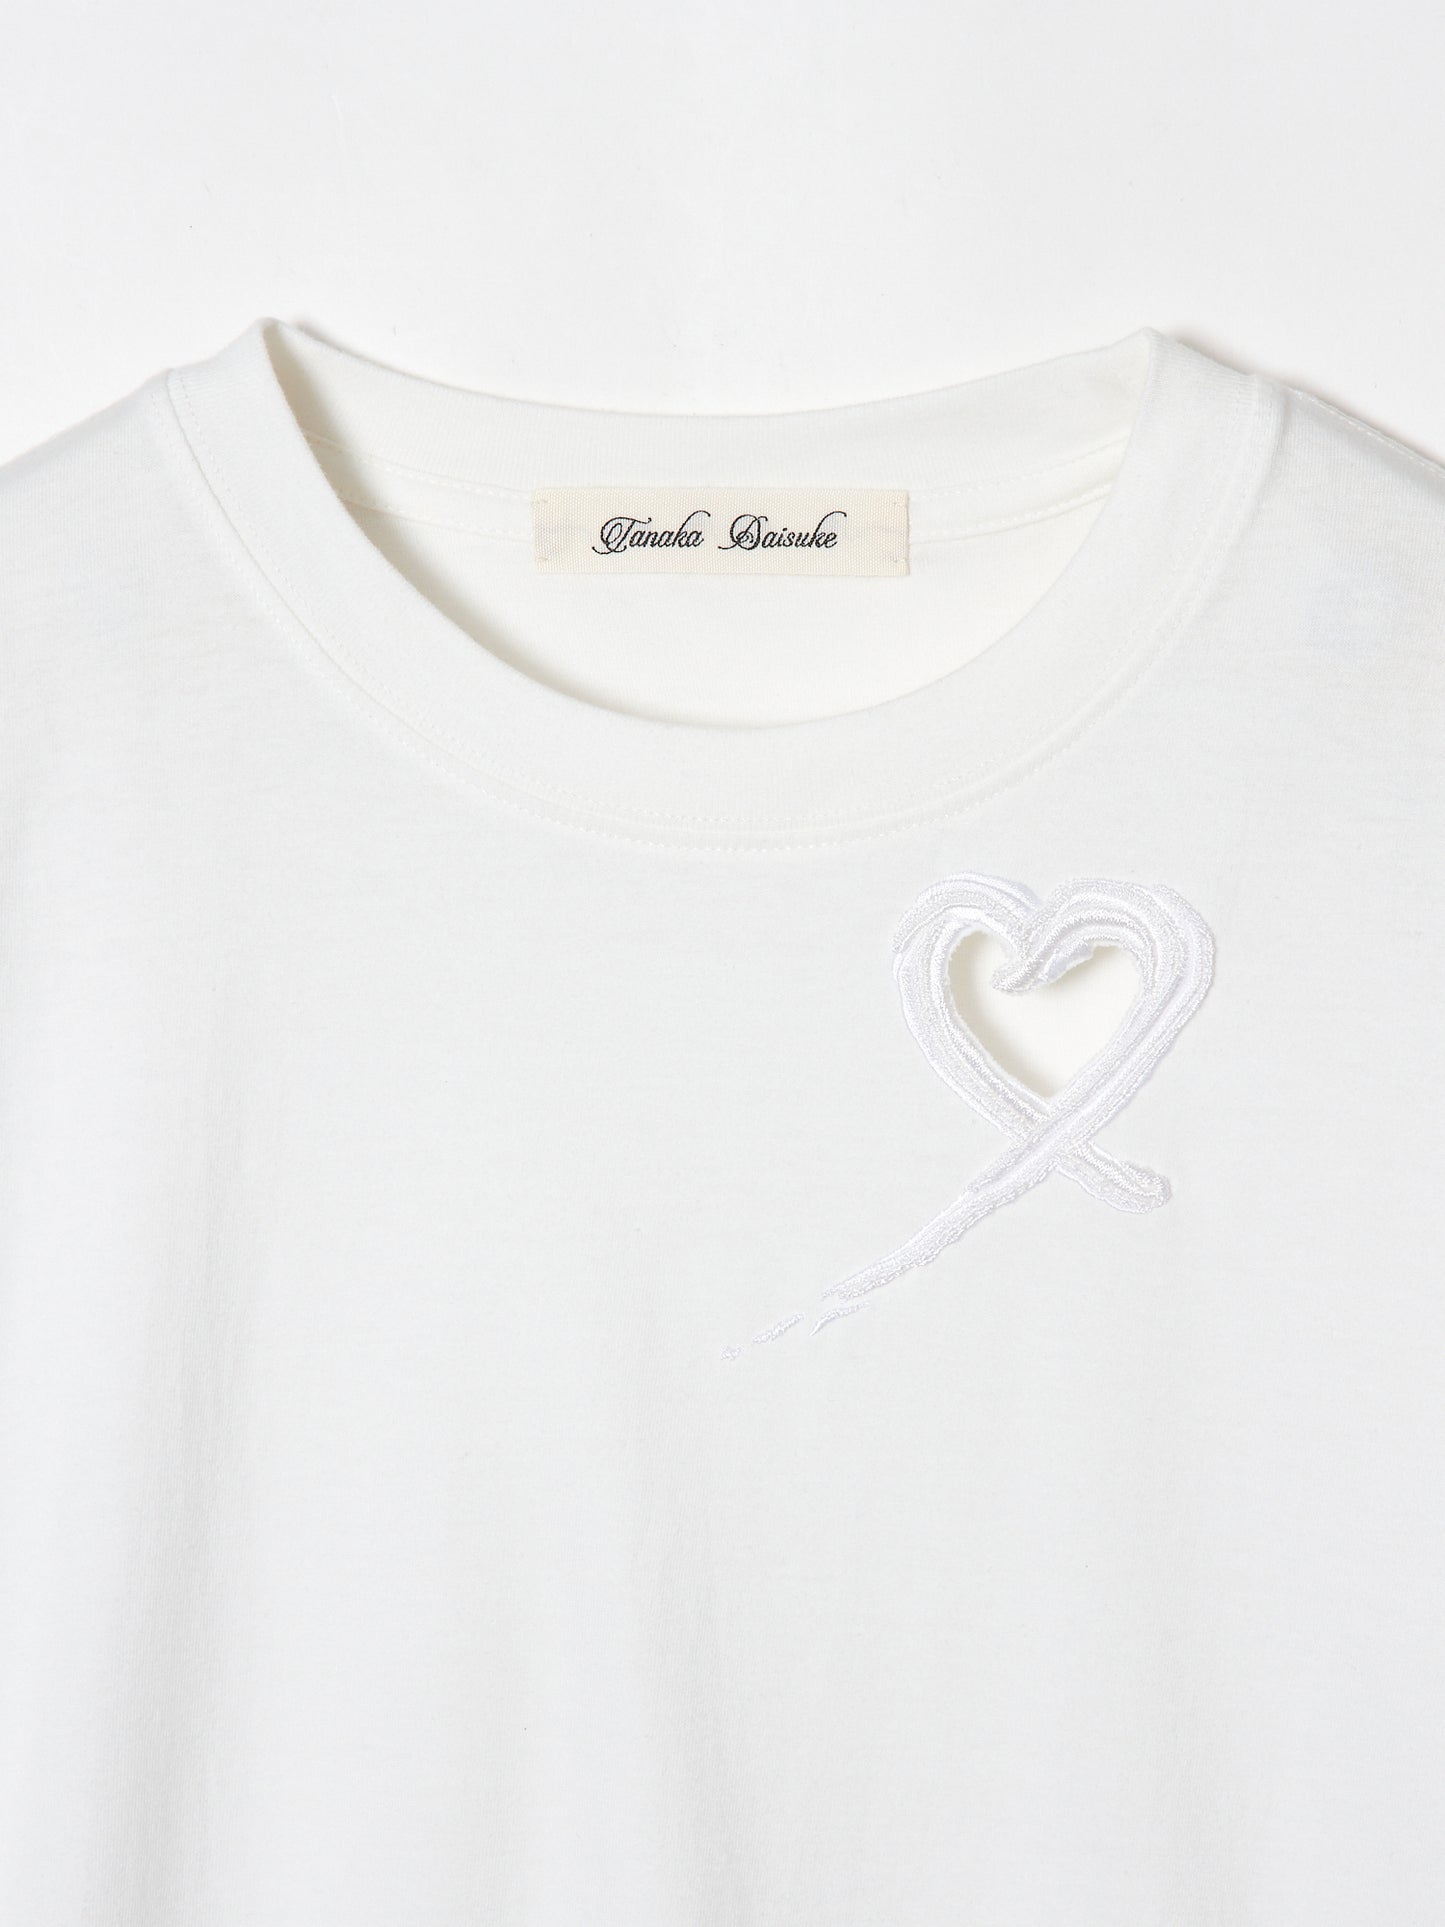 Heart whipped cream T-shirt【Delivery in December 2023】